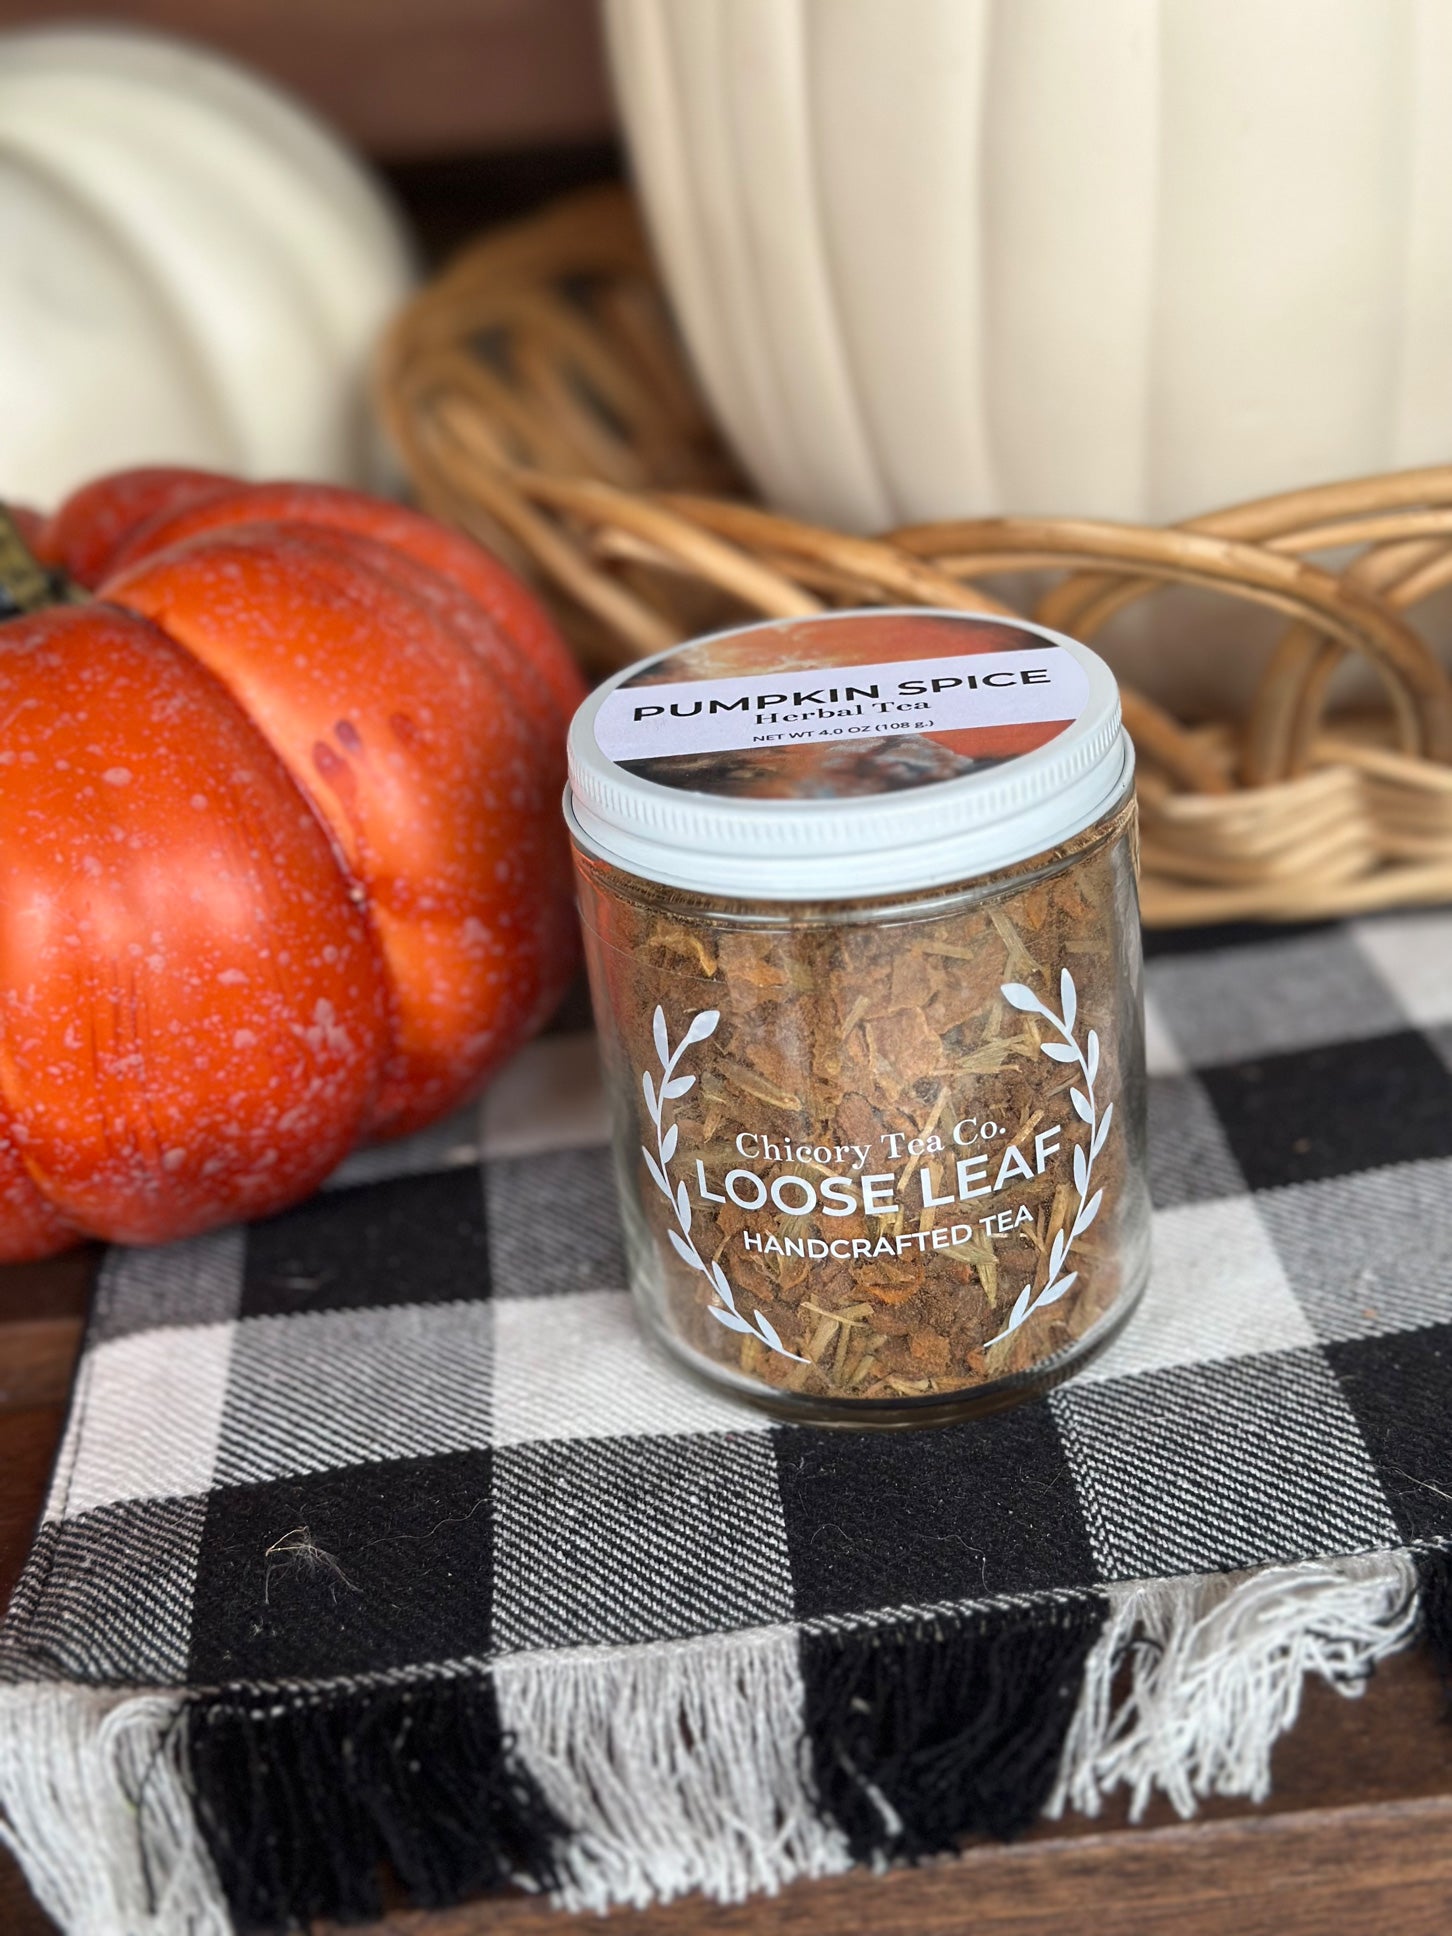 An artistic version of Chicory Tea Co.'s Pumpkin Spice Herbal Tea with pumpkins on the background, sitting on a checkered blanket